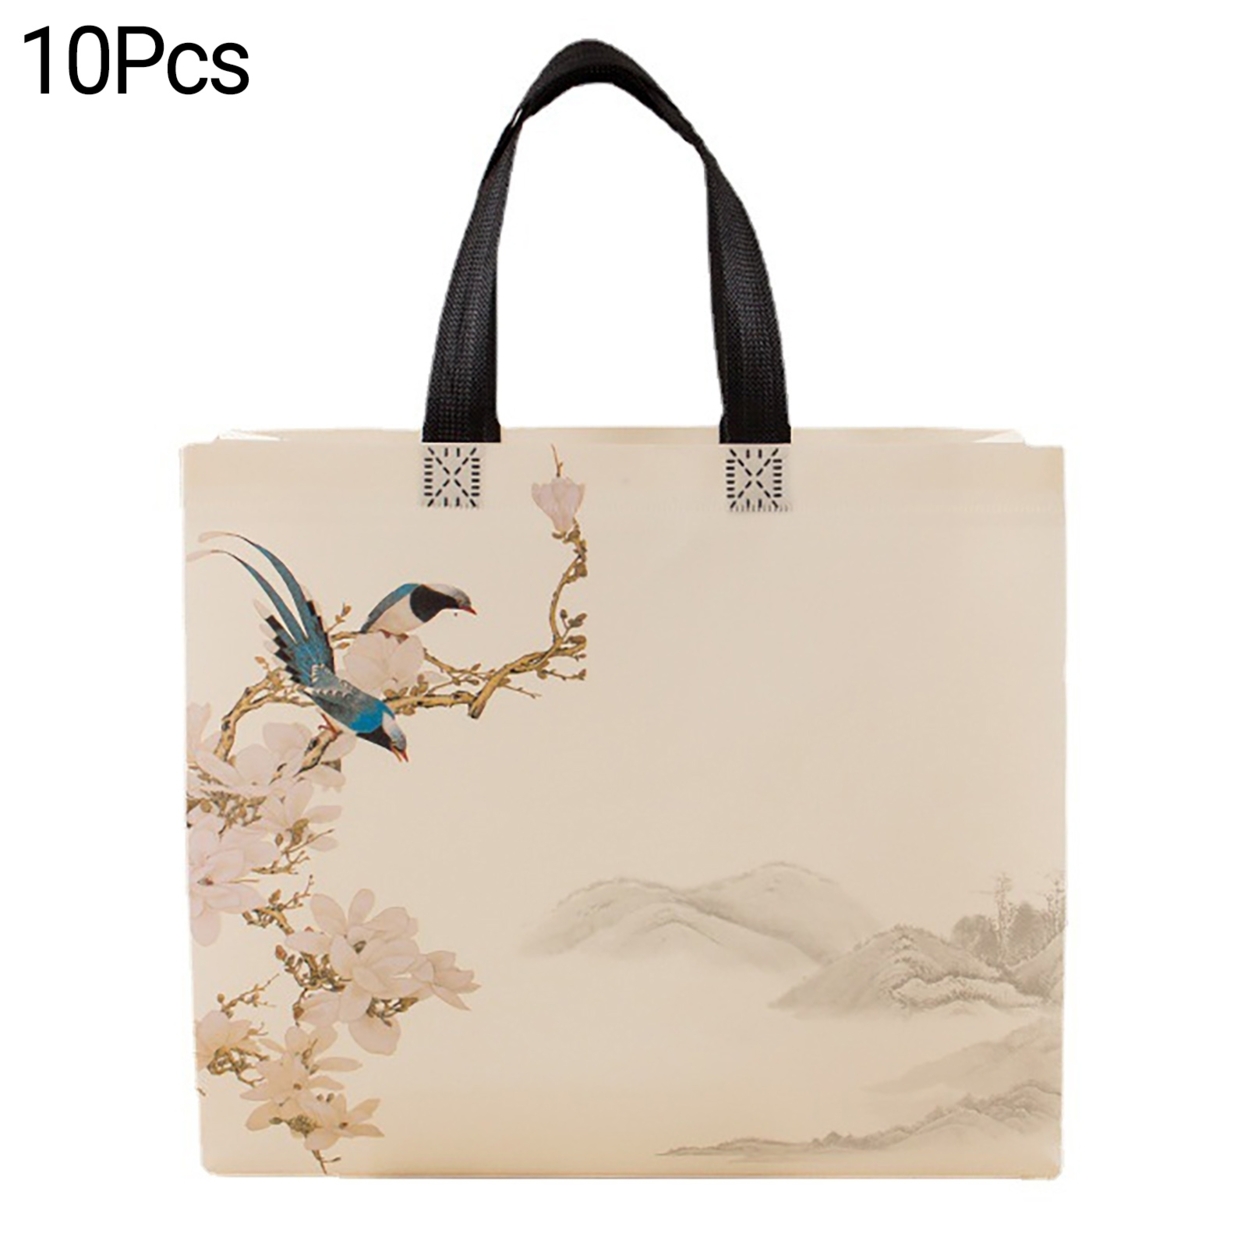 10Pcs Shopping Bag Color Printing Ink Style Non Woven Fabric Bird Clothing Shoulder Bag for Work - l